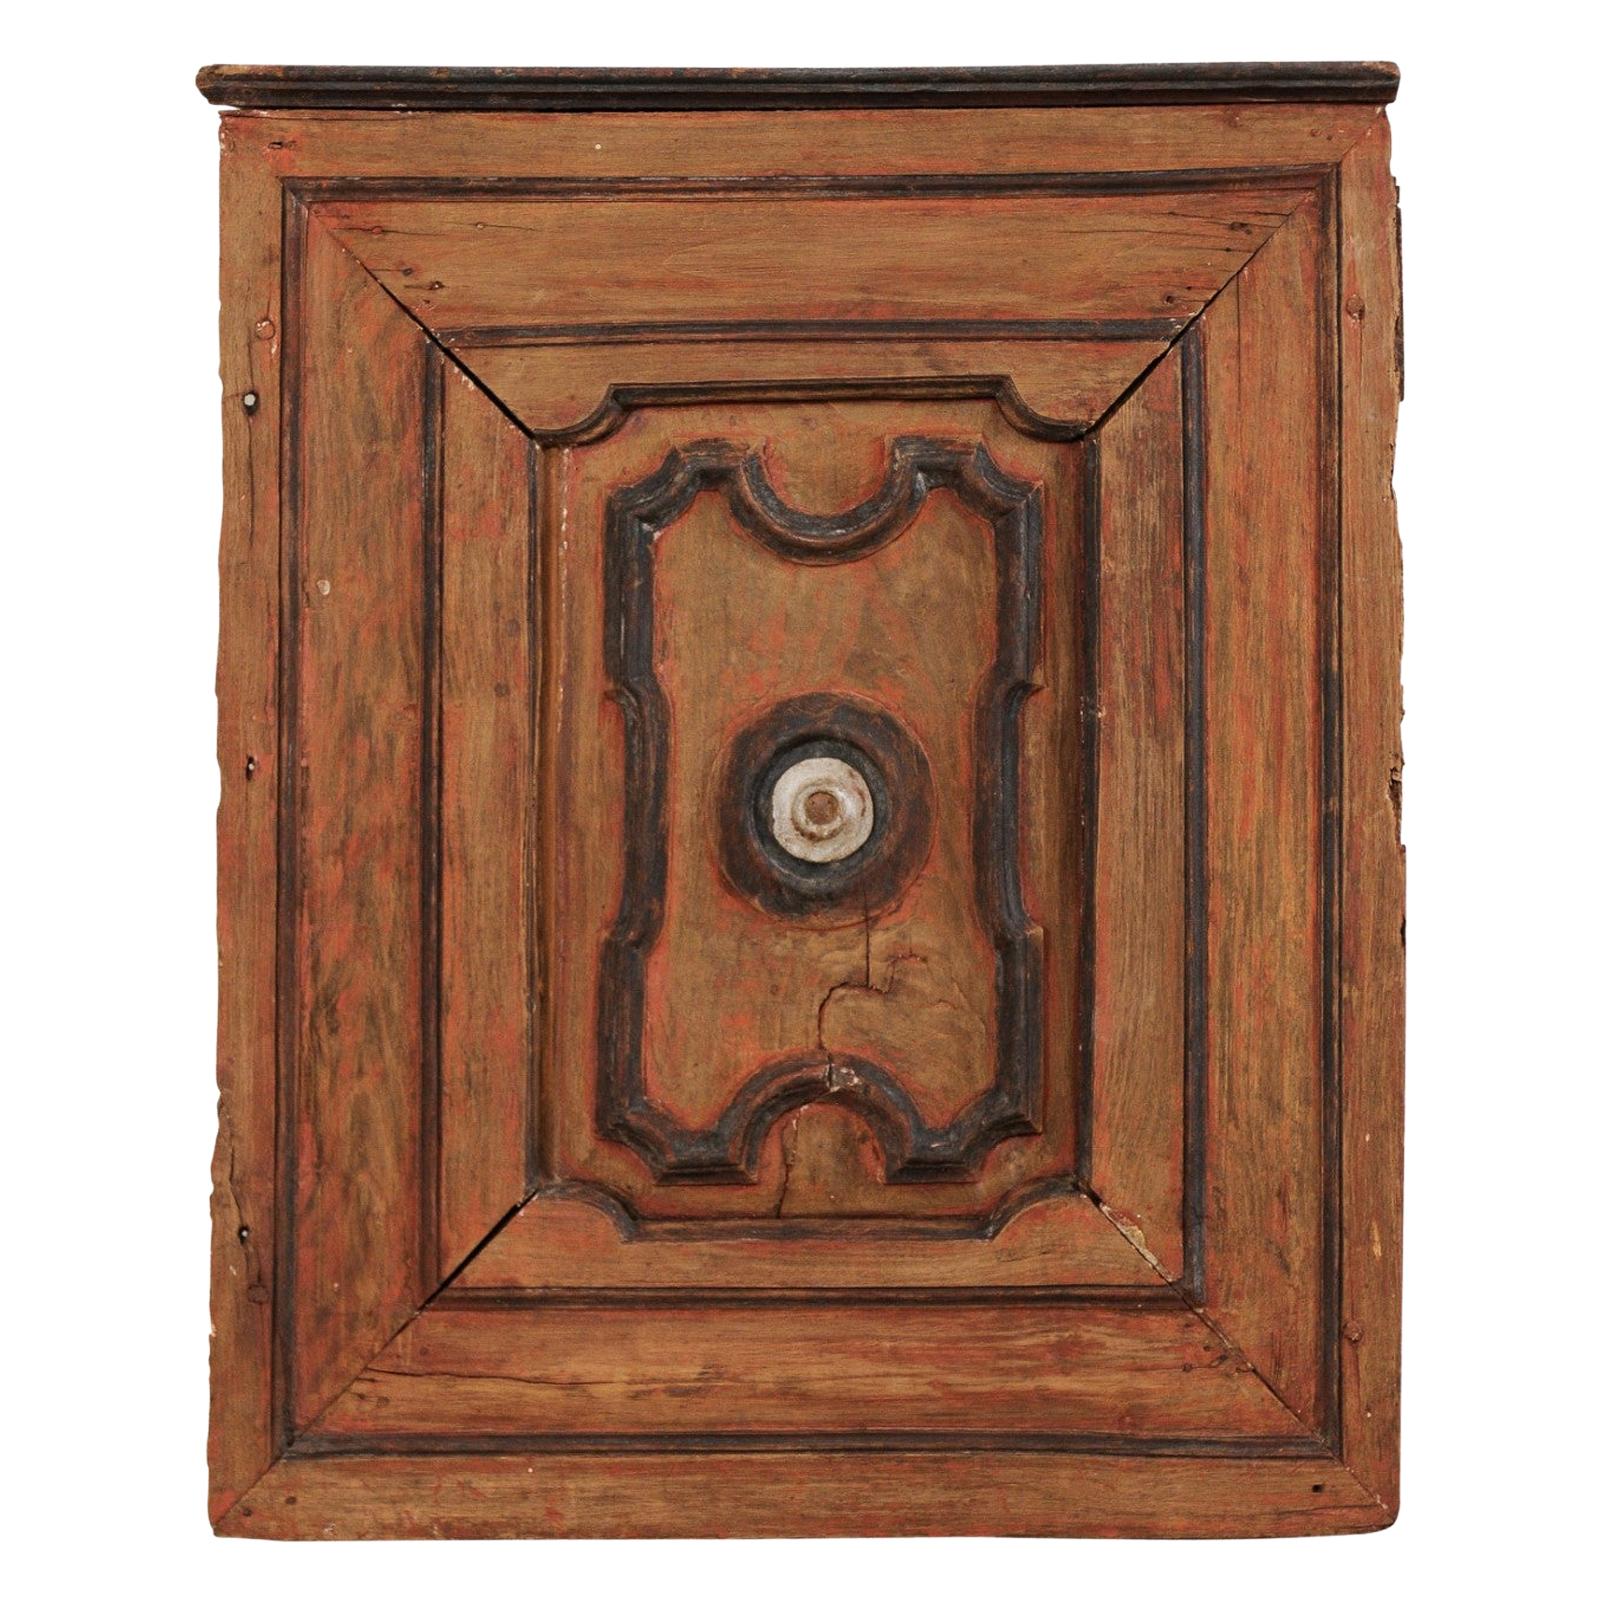 Italian Turn of the 18th and 19th Century Wooden Decorative Wall Panel